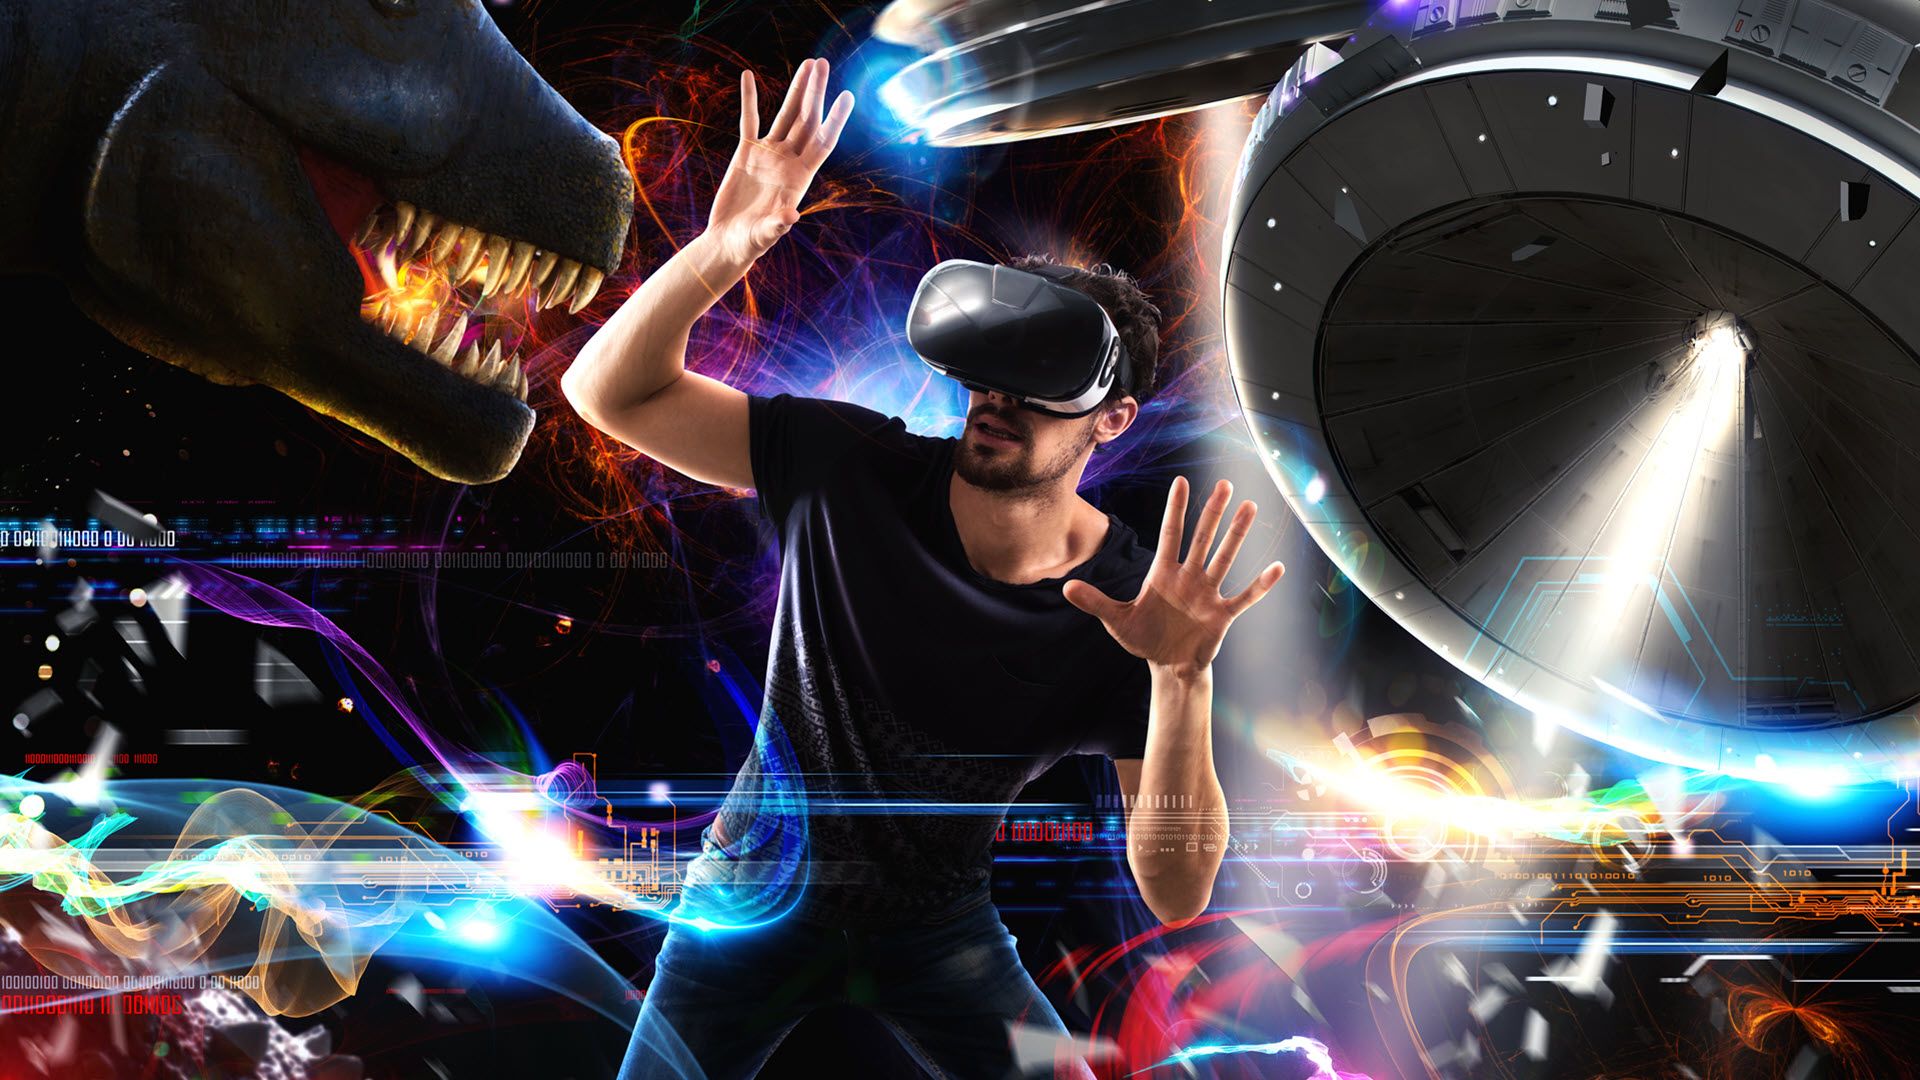 A man playing VR with the virtual world imposed behind him.